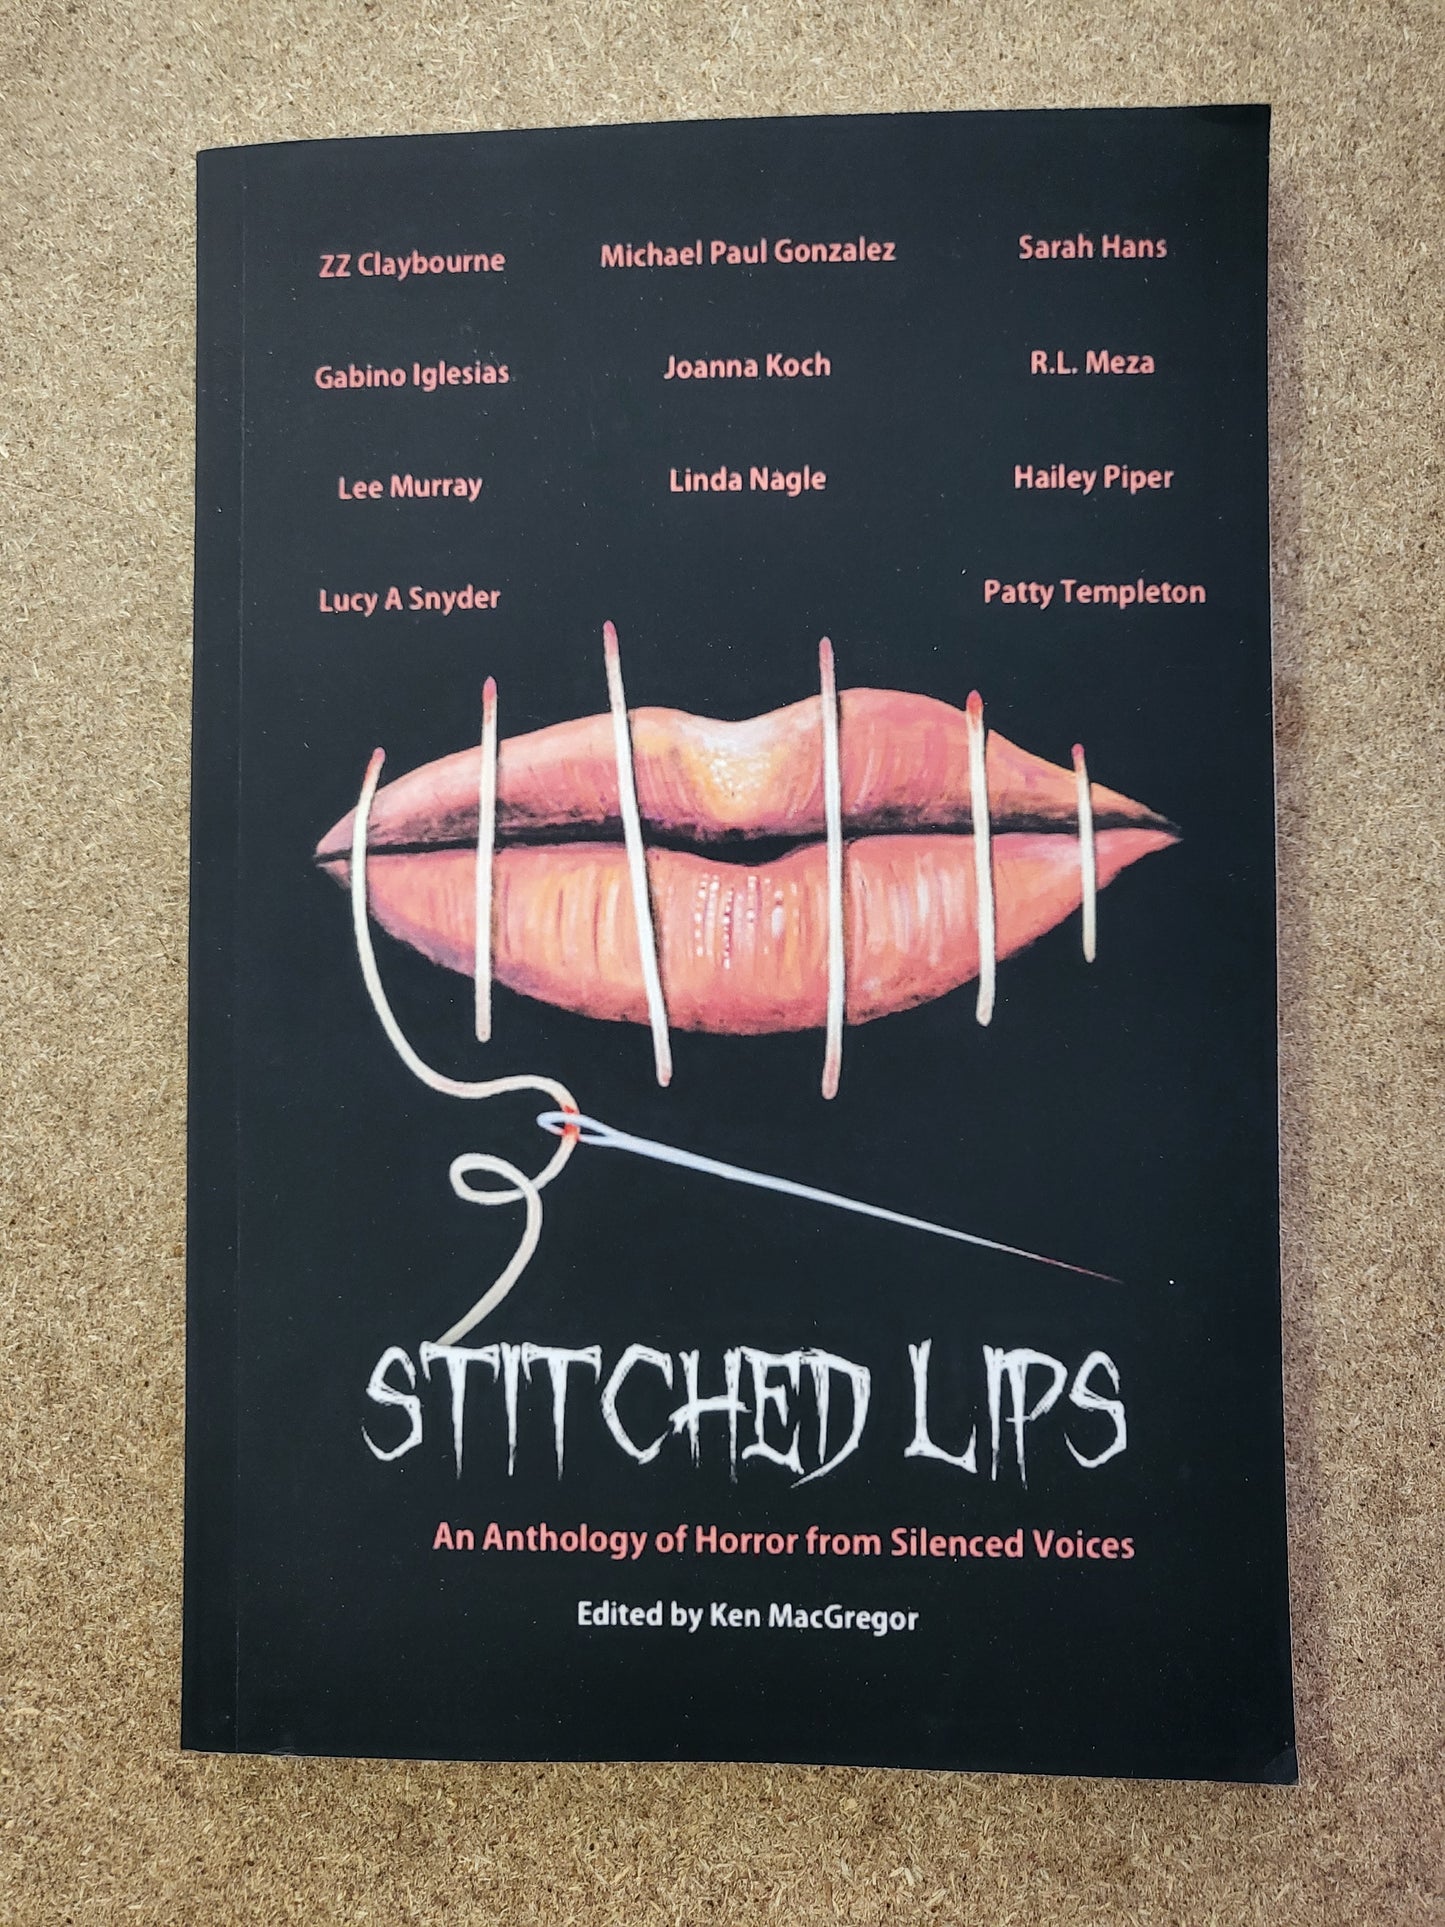 MacGregor, Ken (Editor) - Stitched Lips: An Anthology of Horror from Silenced Voices